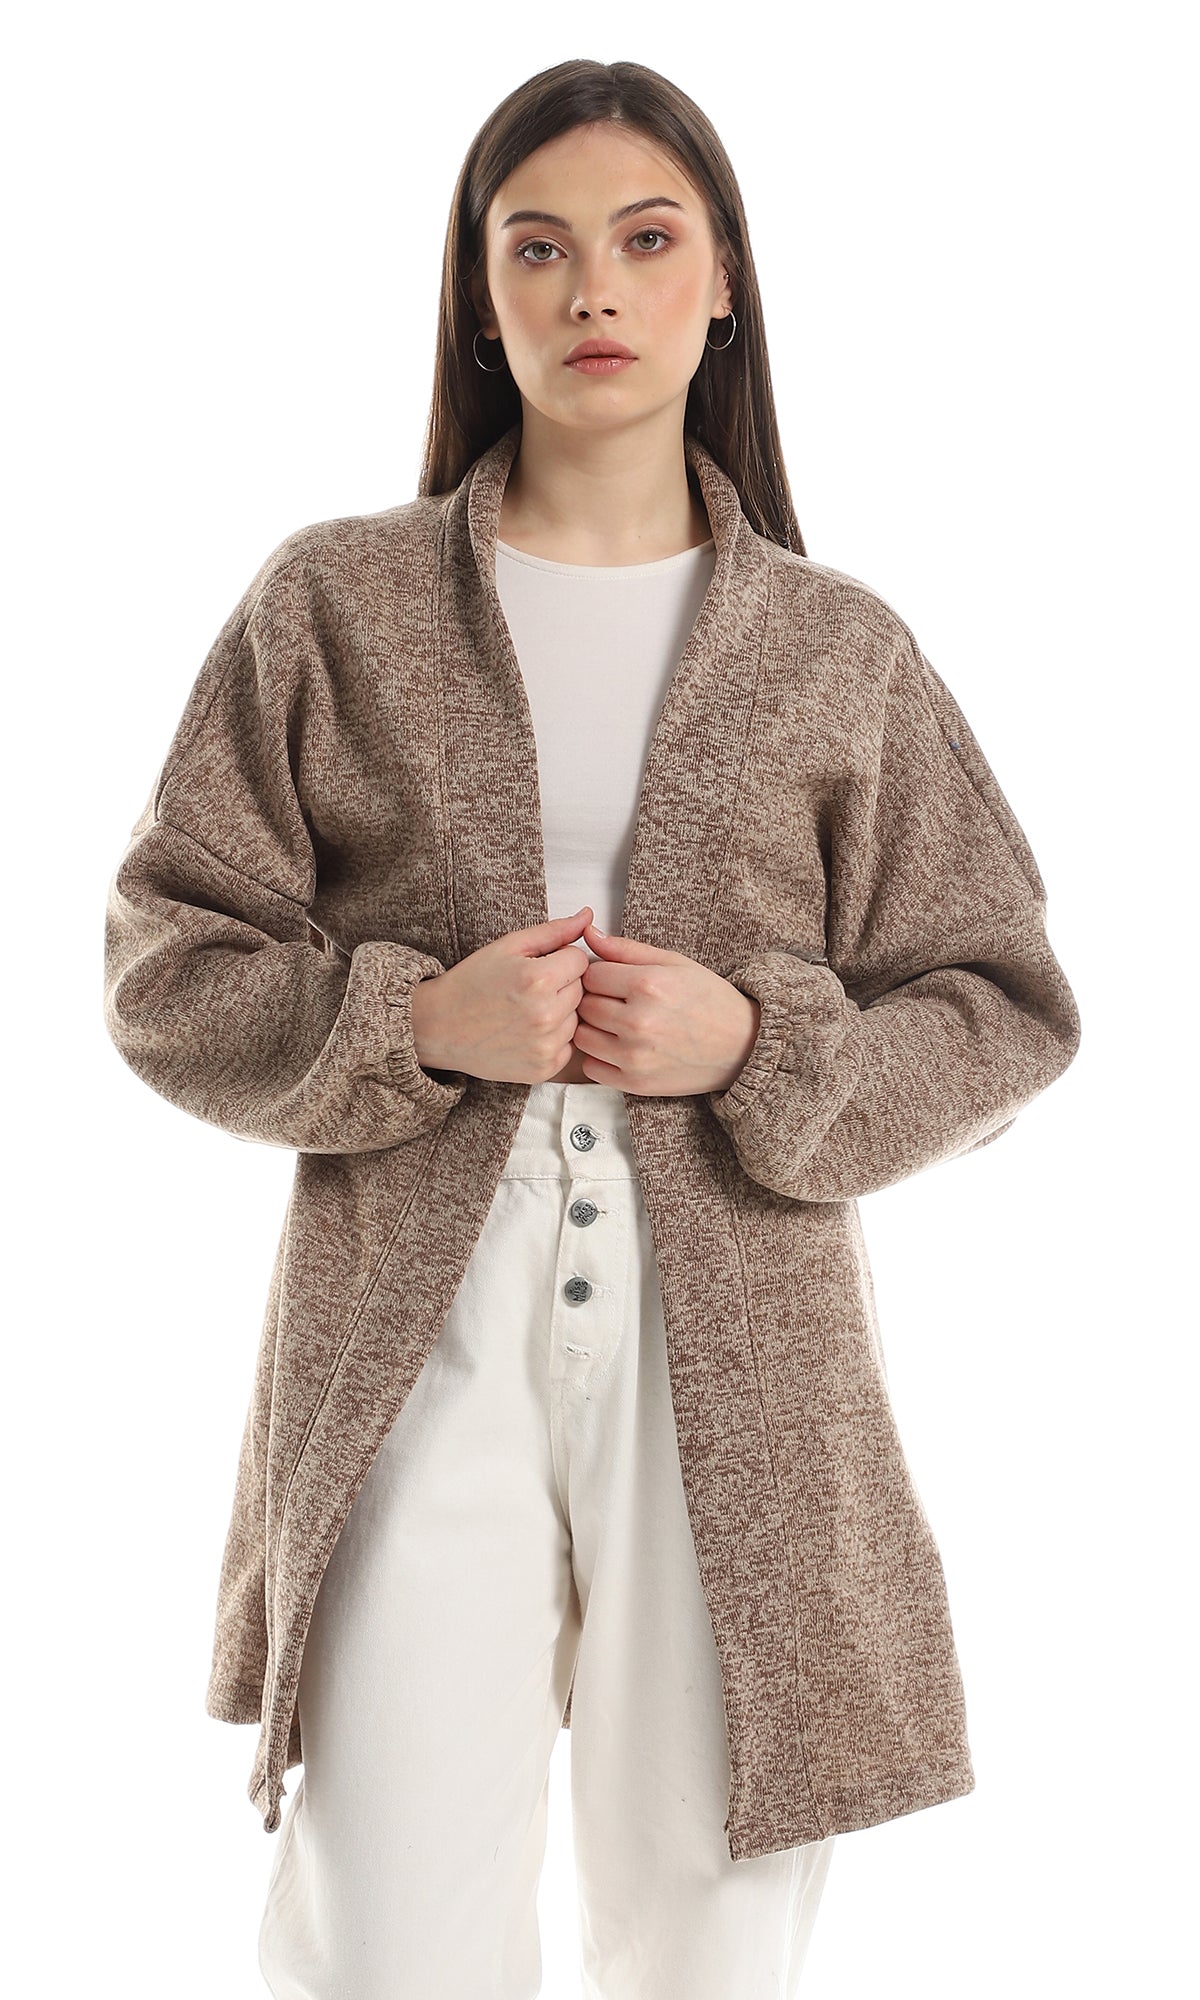 O162759 Knitted Long Sleeves Cardigan With Elastic Cuffs - Brown & Beige